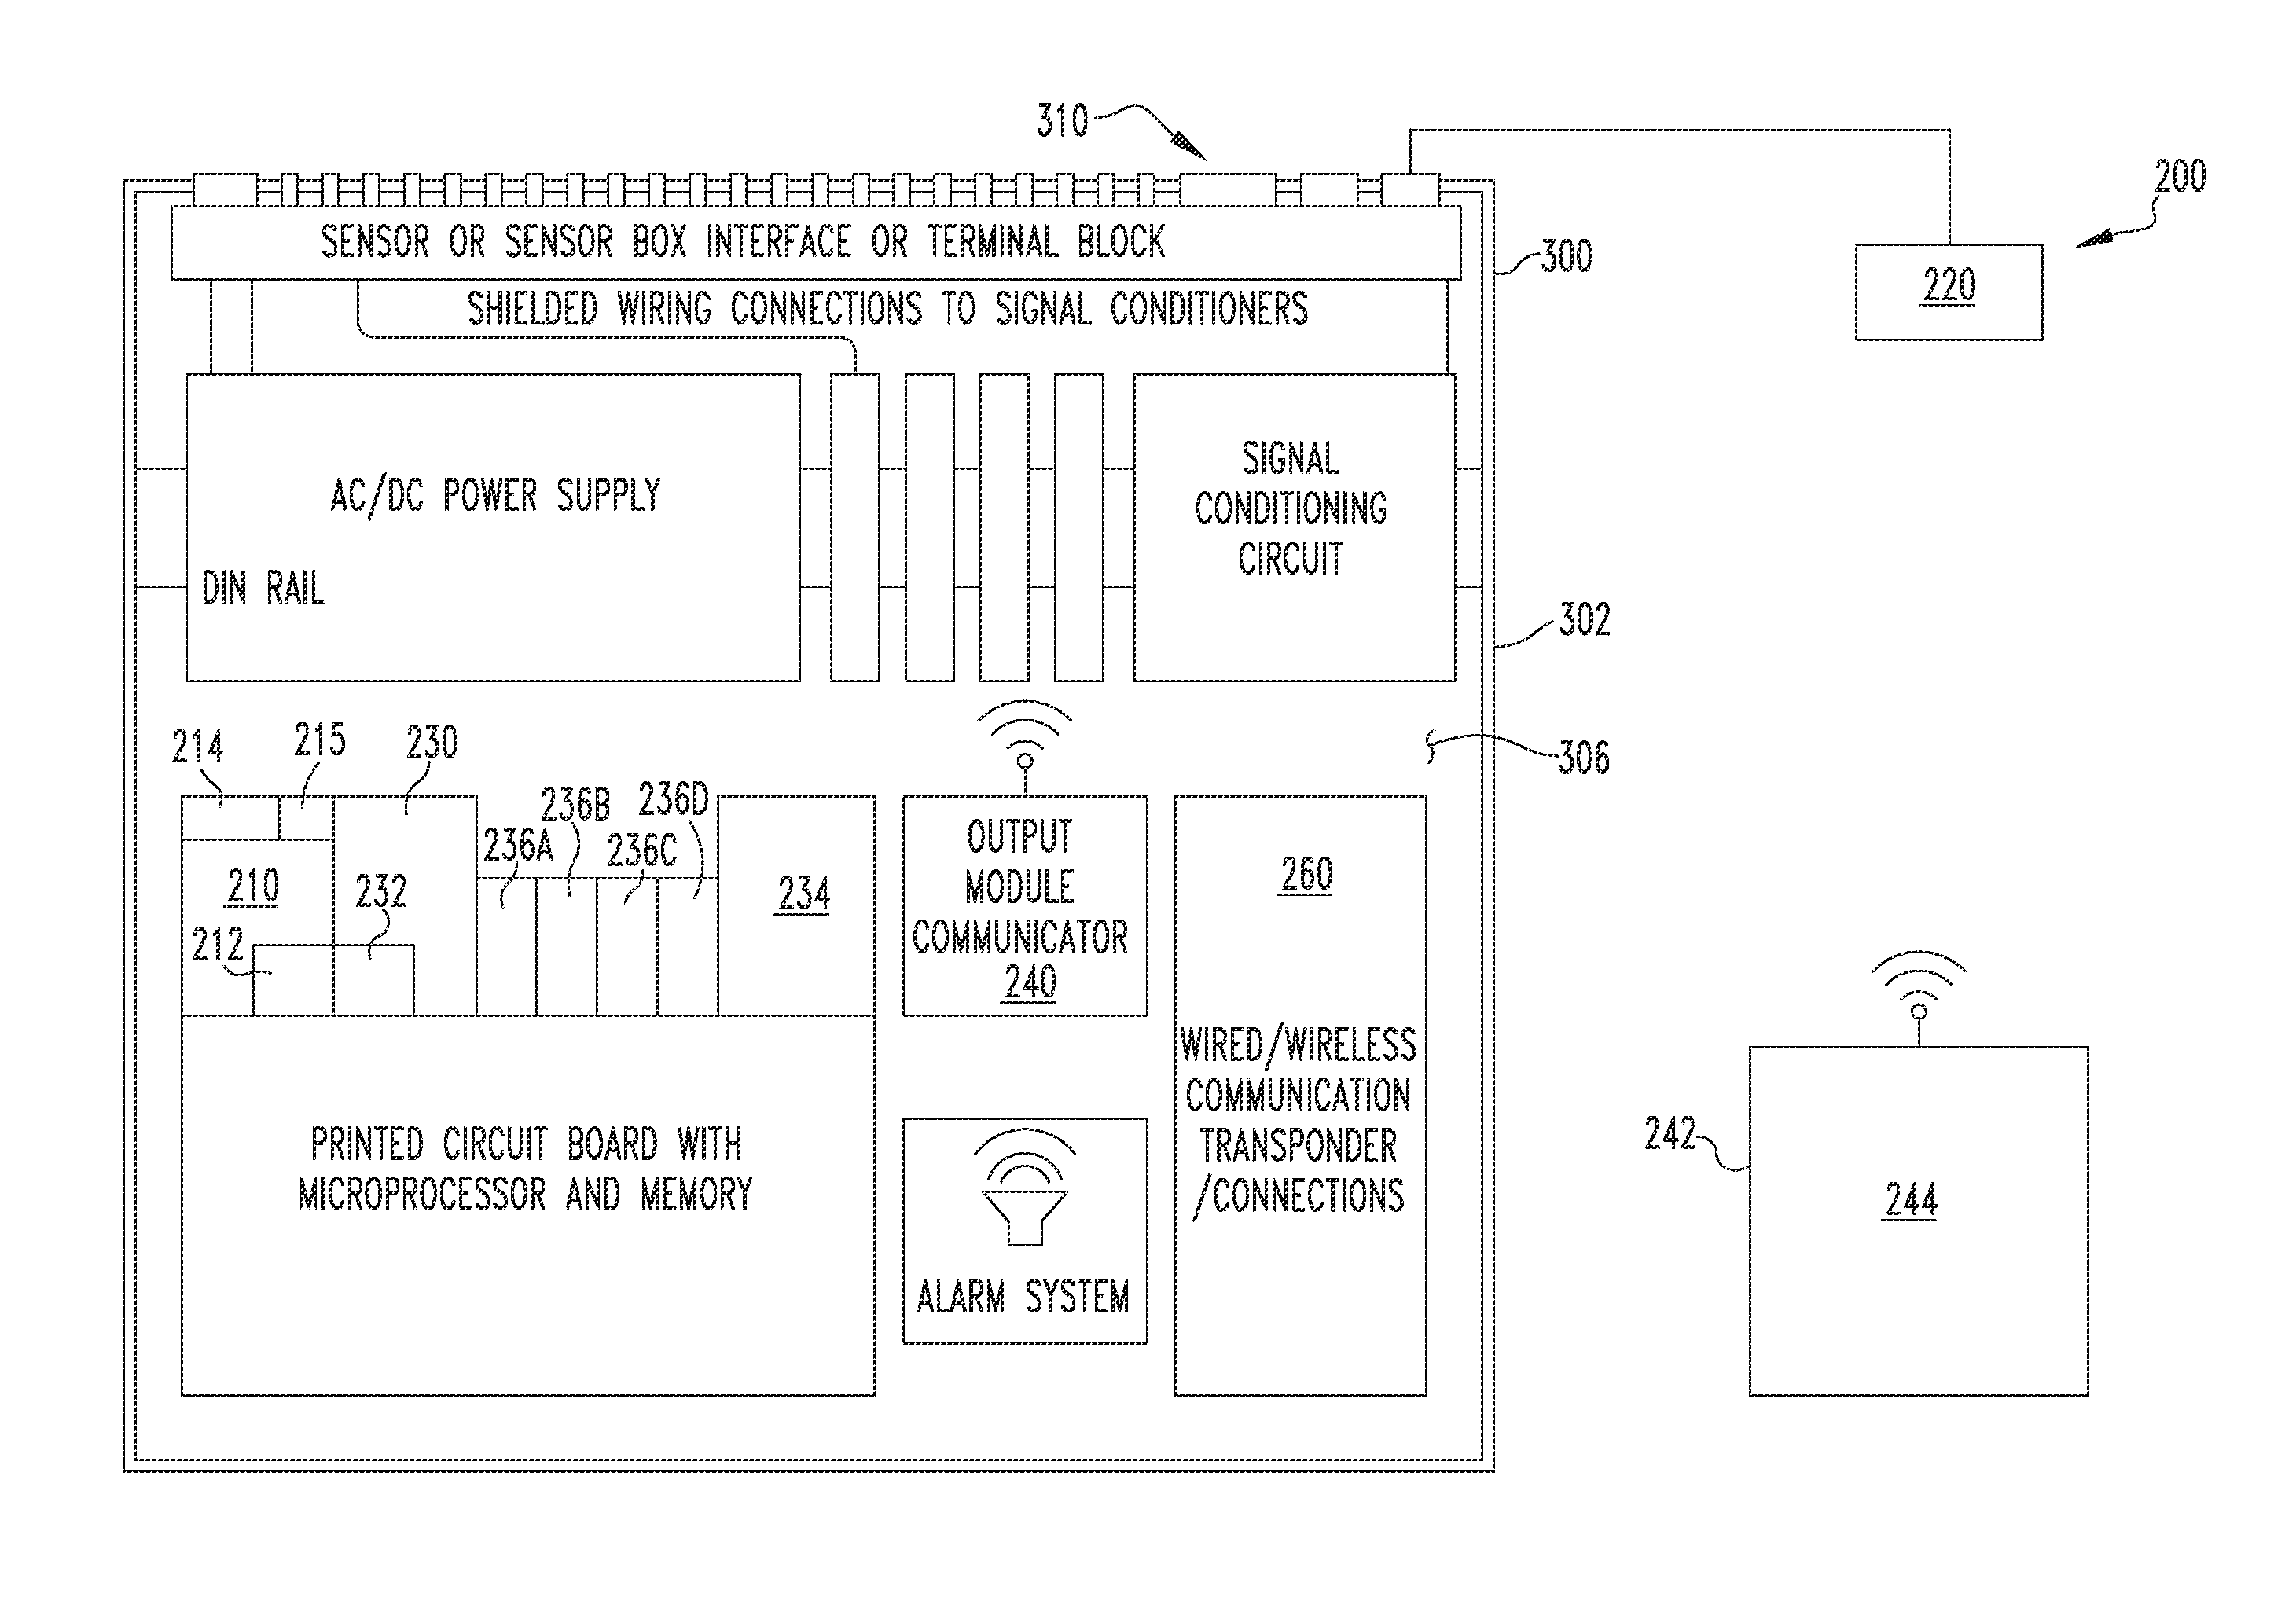 Component monitoring system with monitory latch assembly